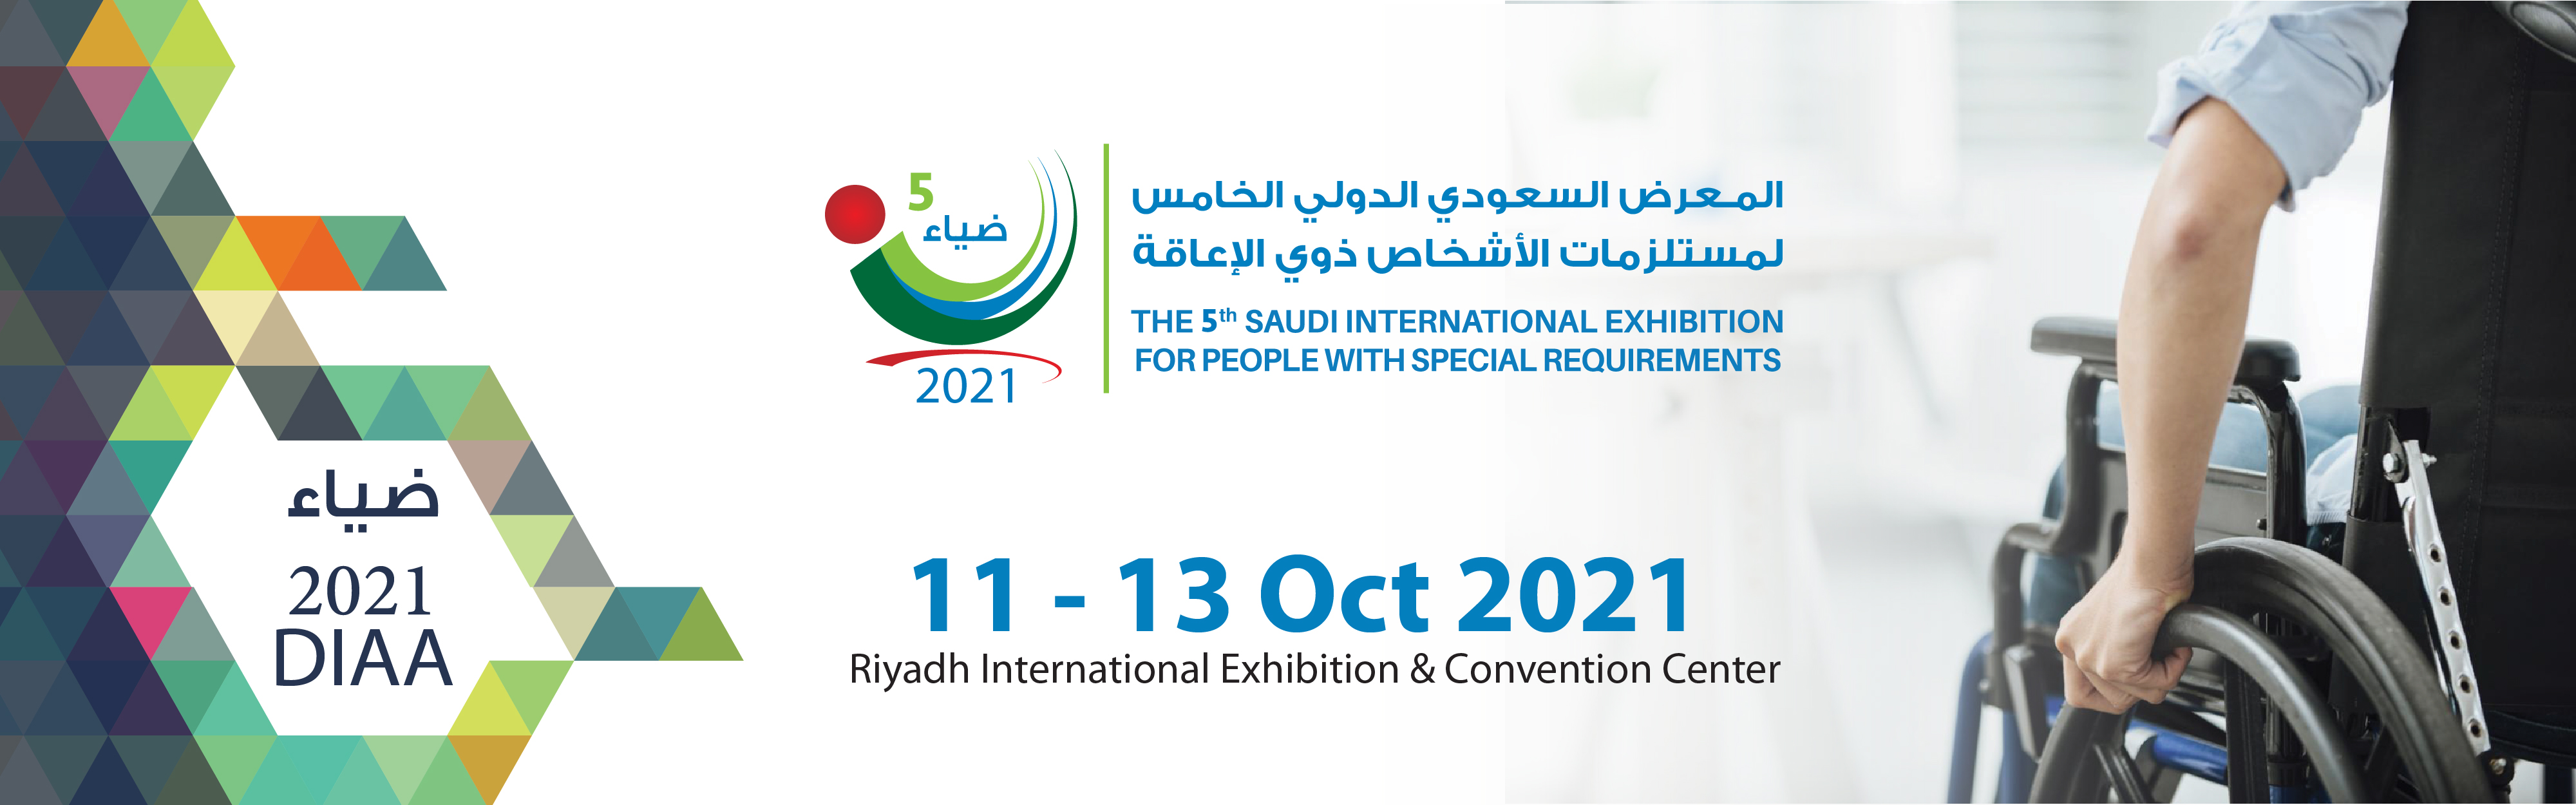 Saudi International Exhibition For People With Special Requirements (DIAA)